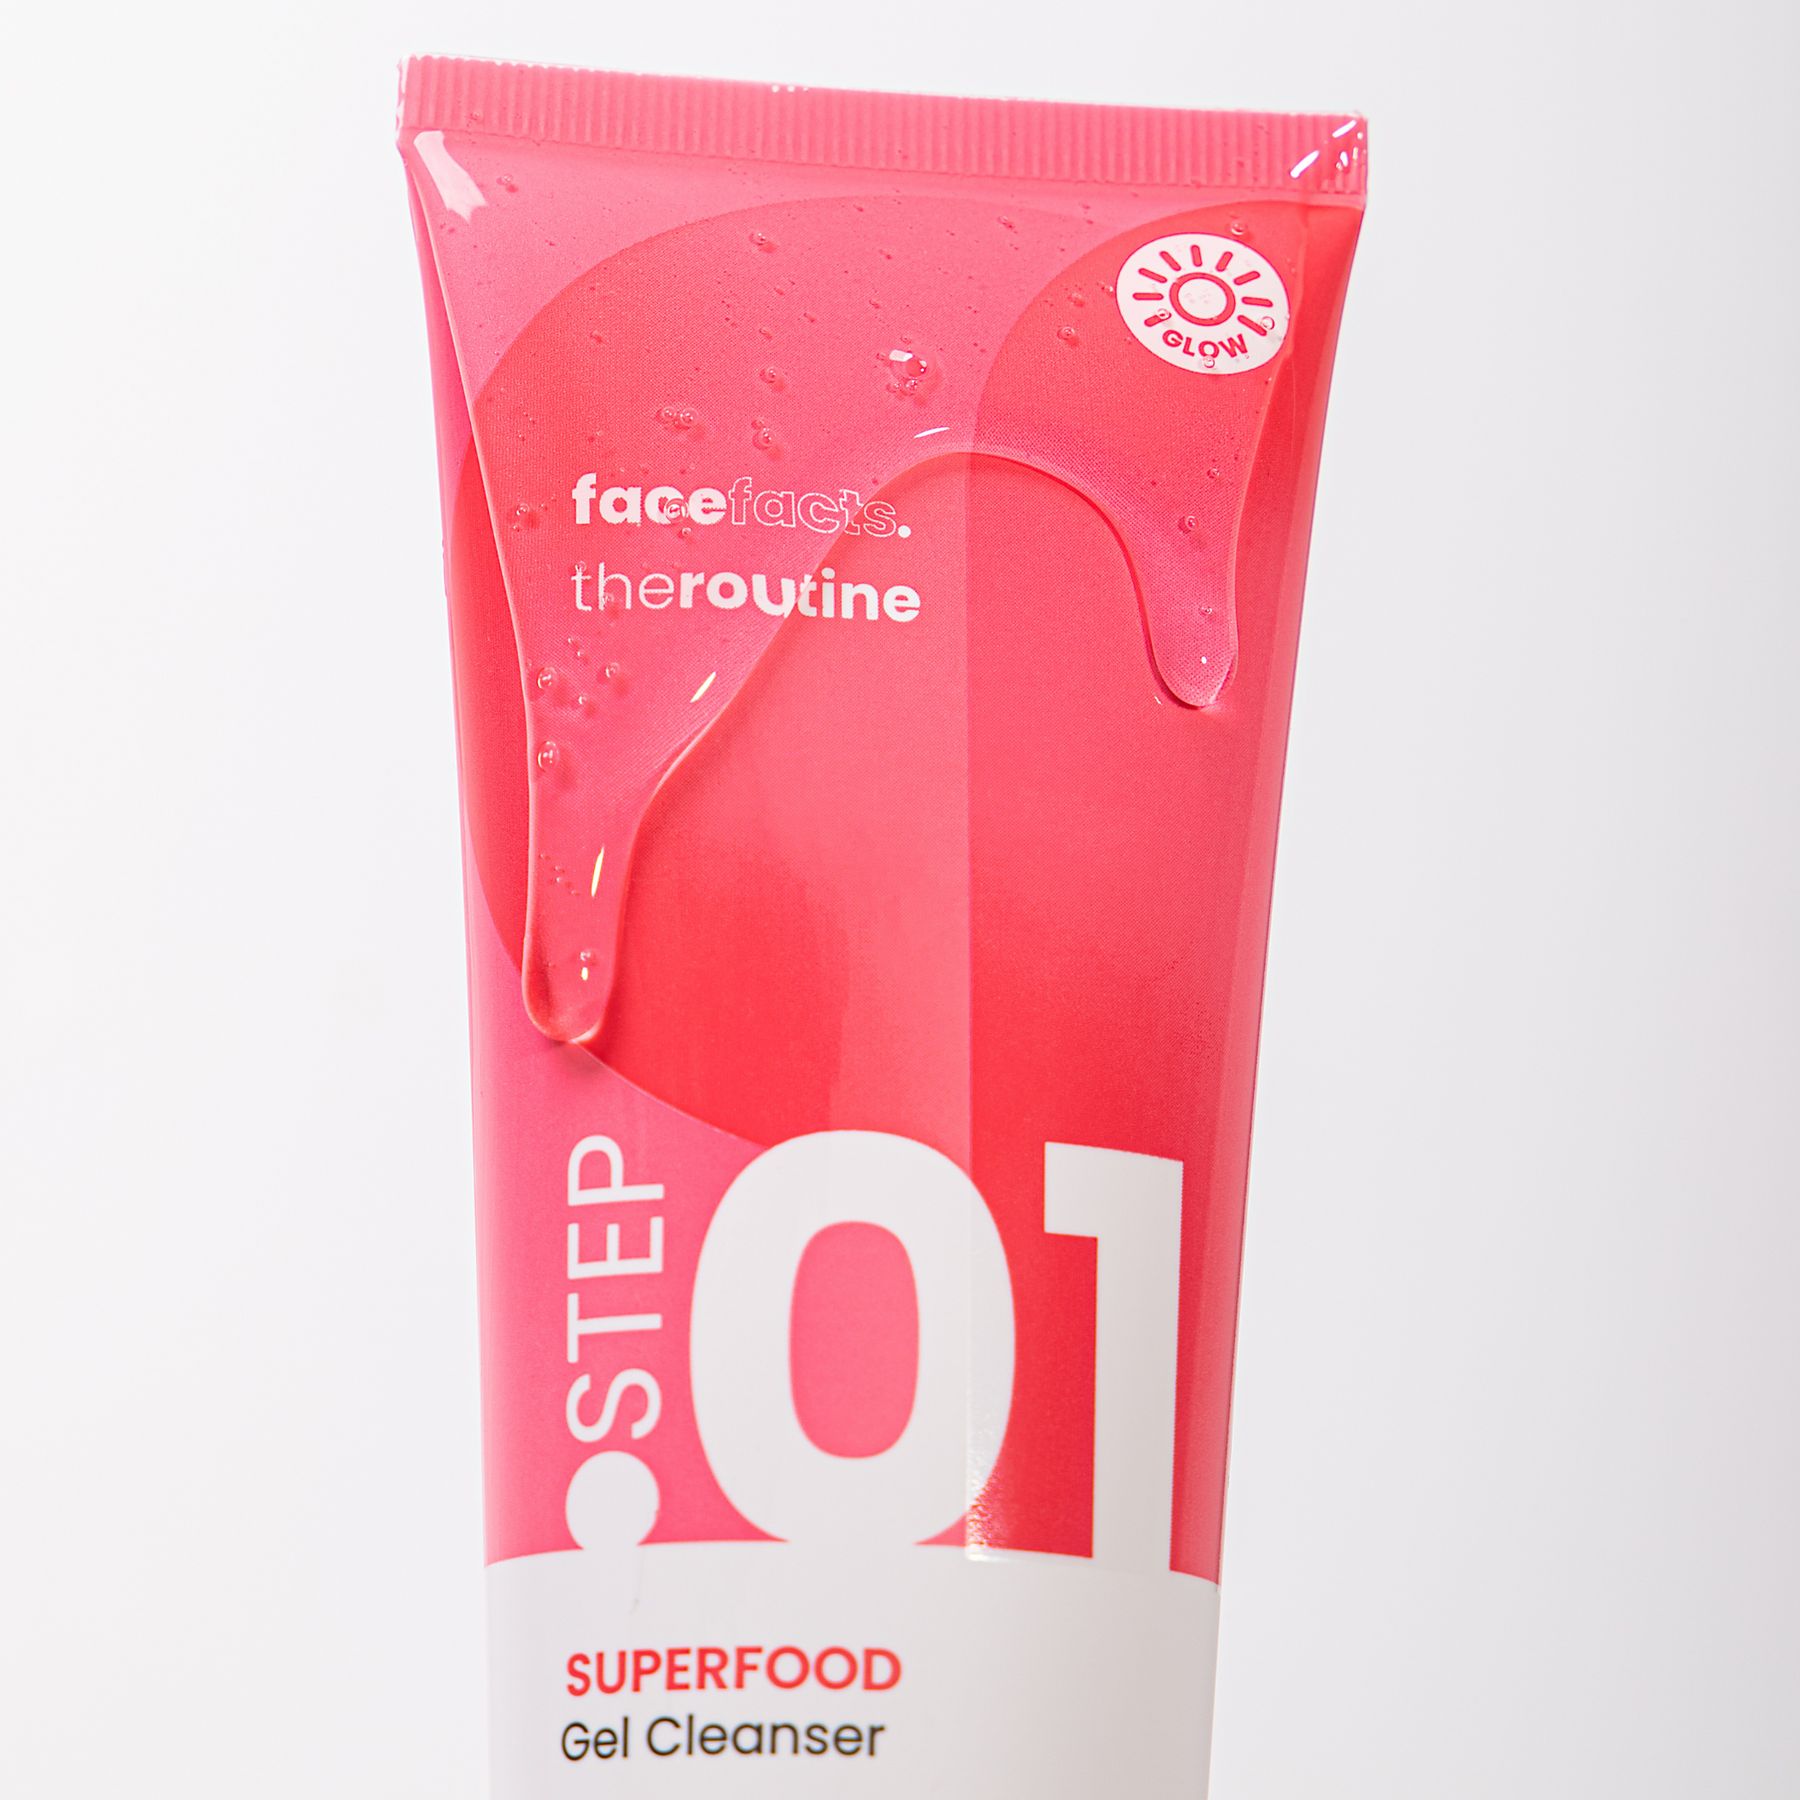 Очищаючий гель Face Facts The Routine Step 1 Superfood Gel Cleanser 120 мл - фото 2